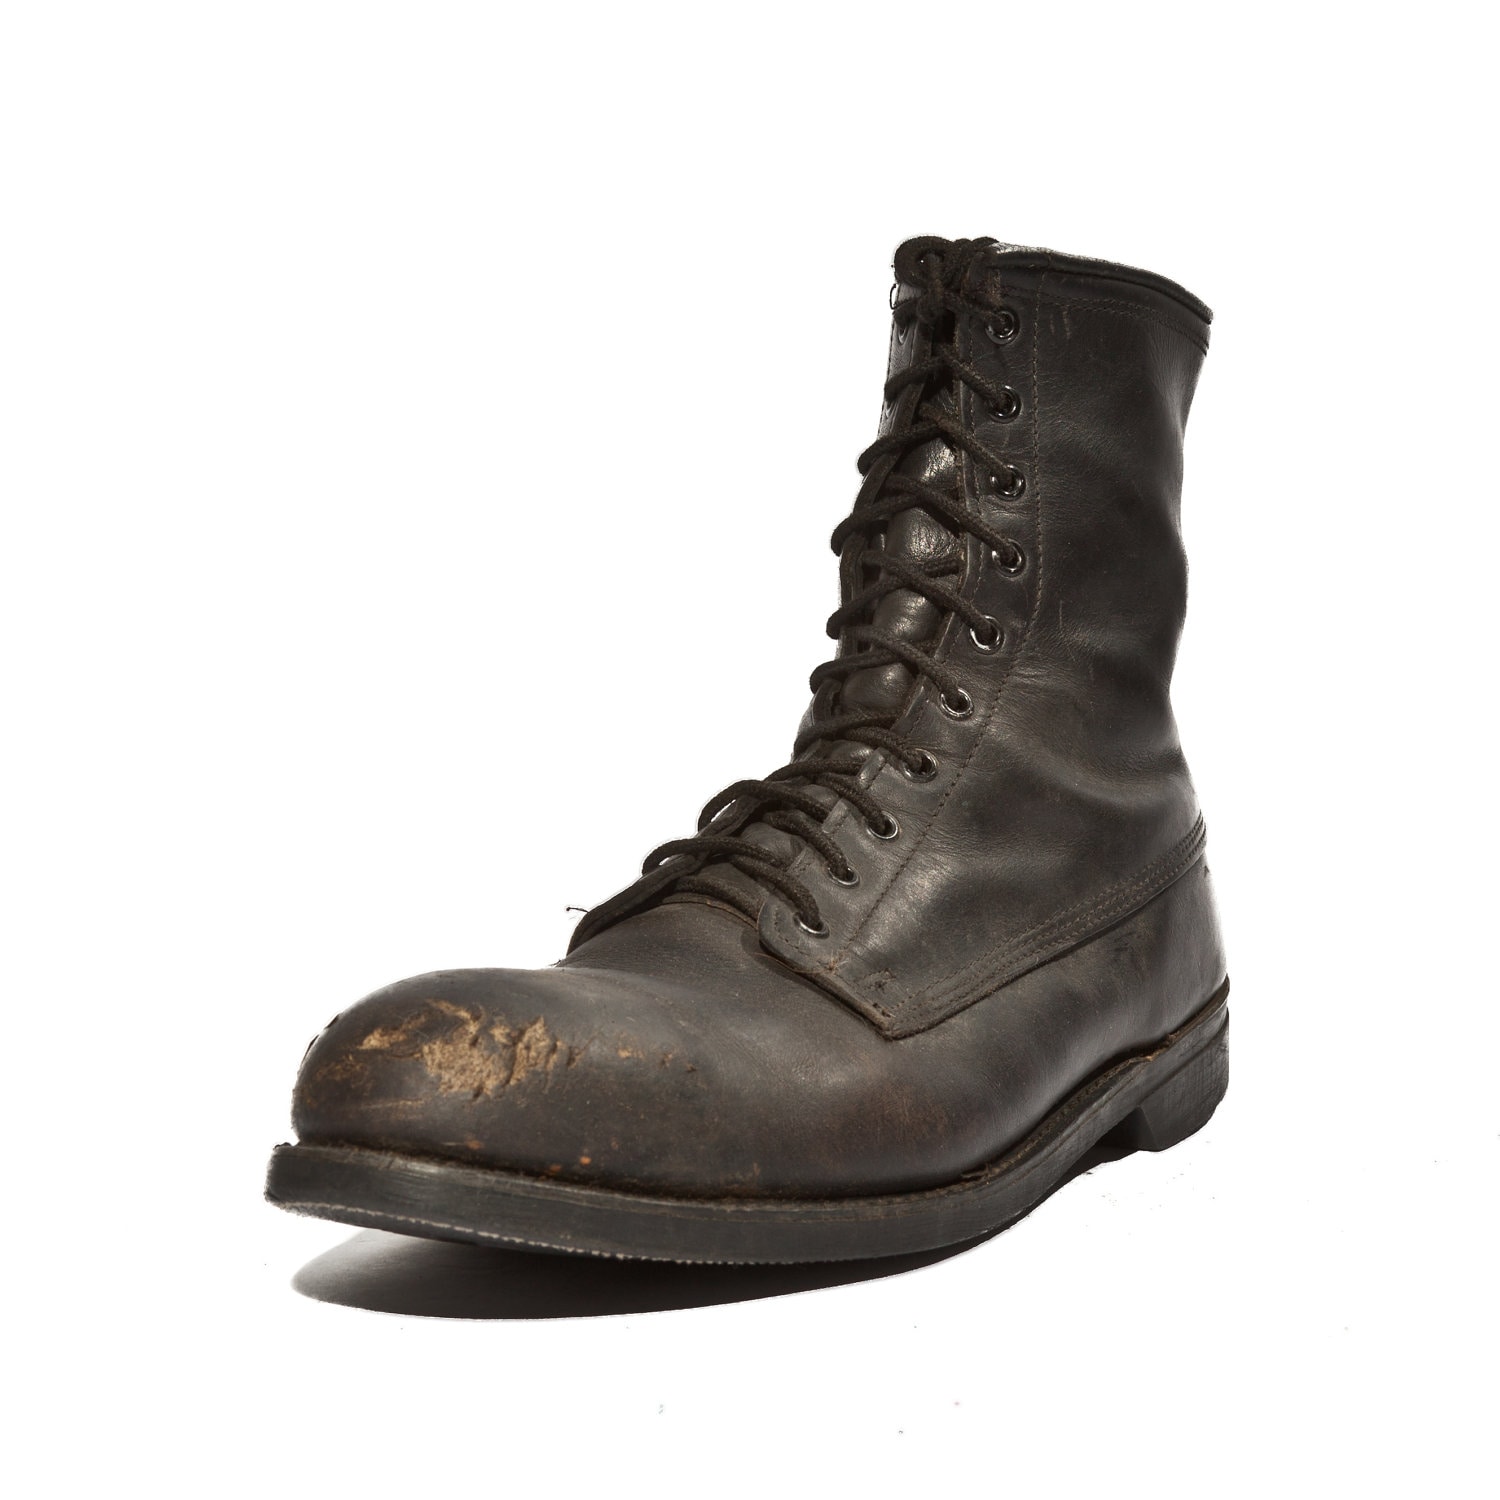 Vintage Altama Combat Boots Short Styled by RabbitHouseVintage